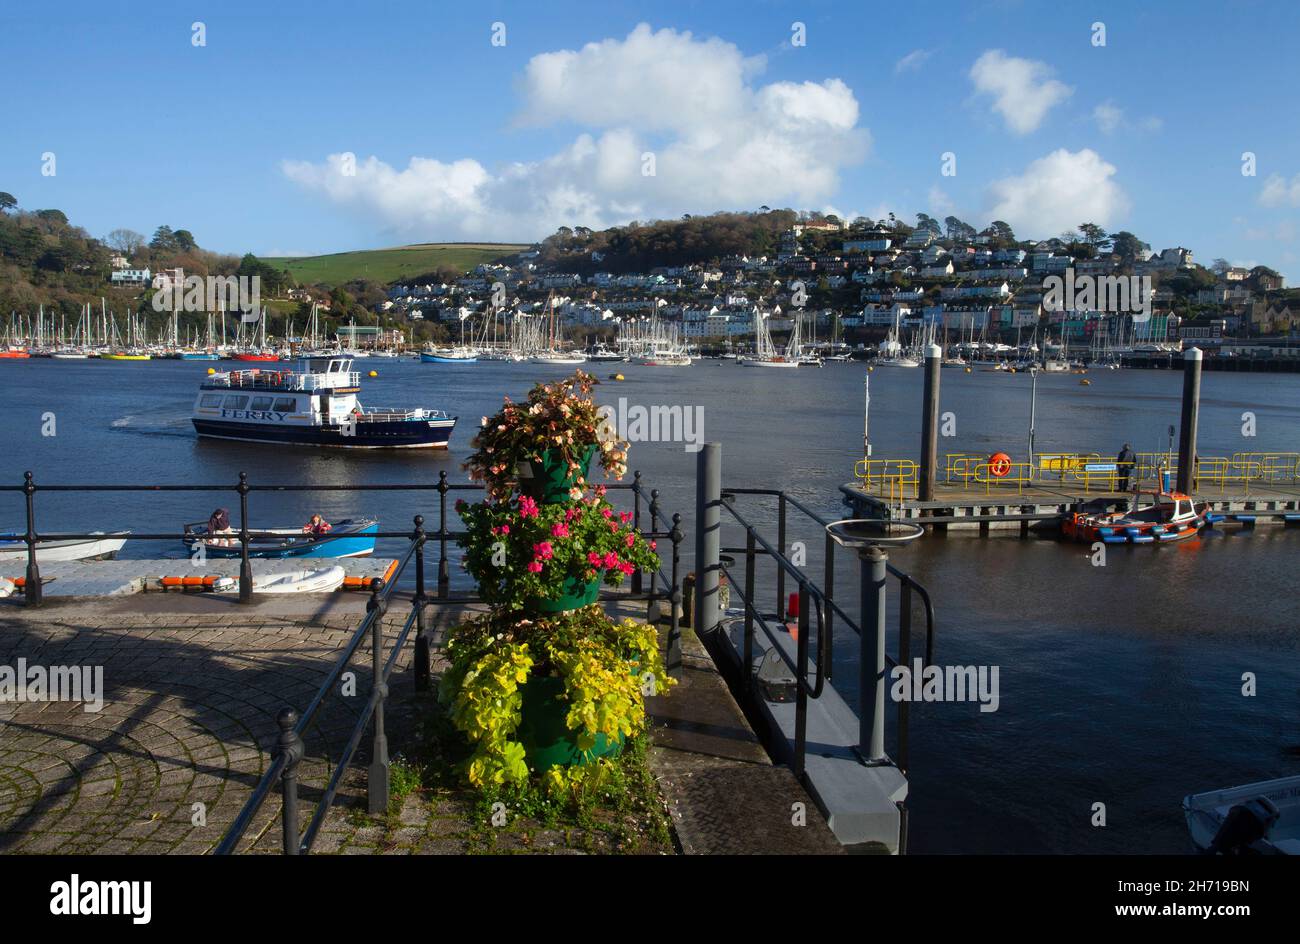 River Dart from Dartmouth side looking towards Kingswear Ferry on river yachts and flower arrangement on the quayside in summer blue sky copy space Stock Photo